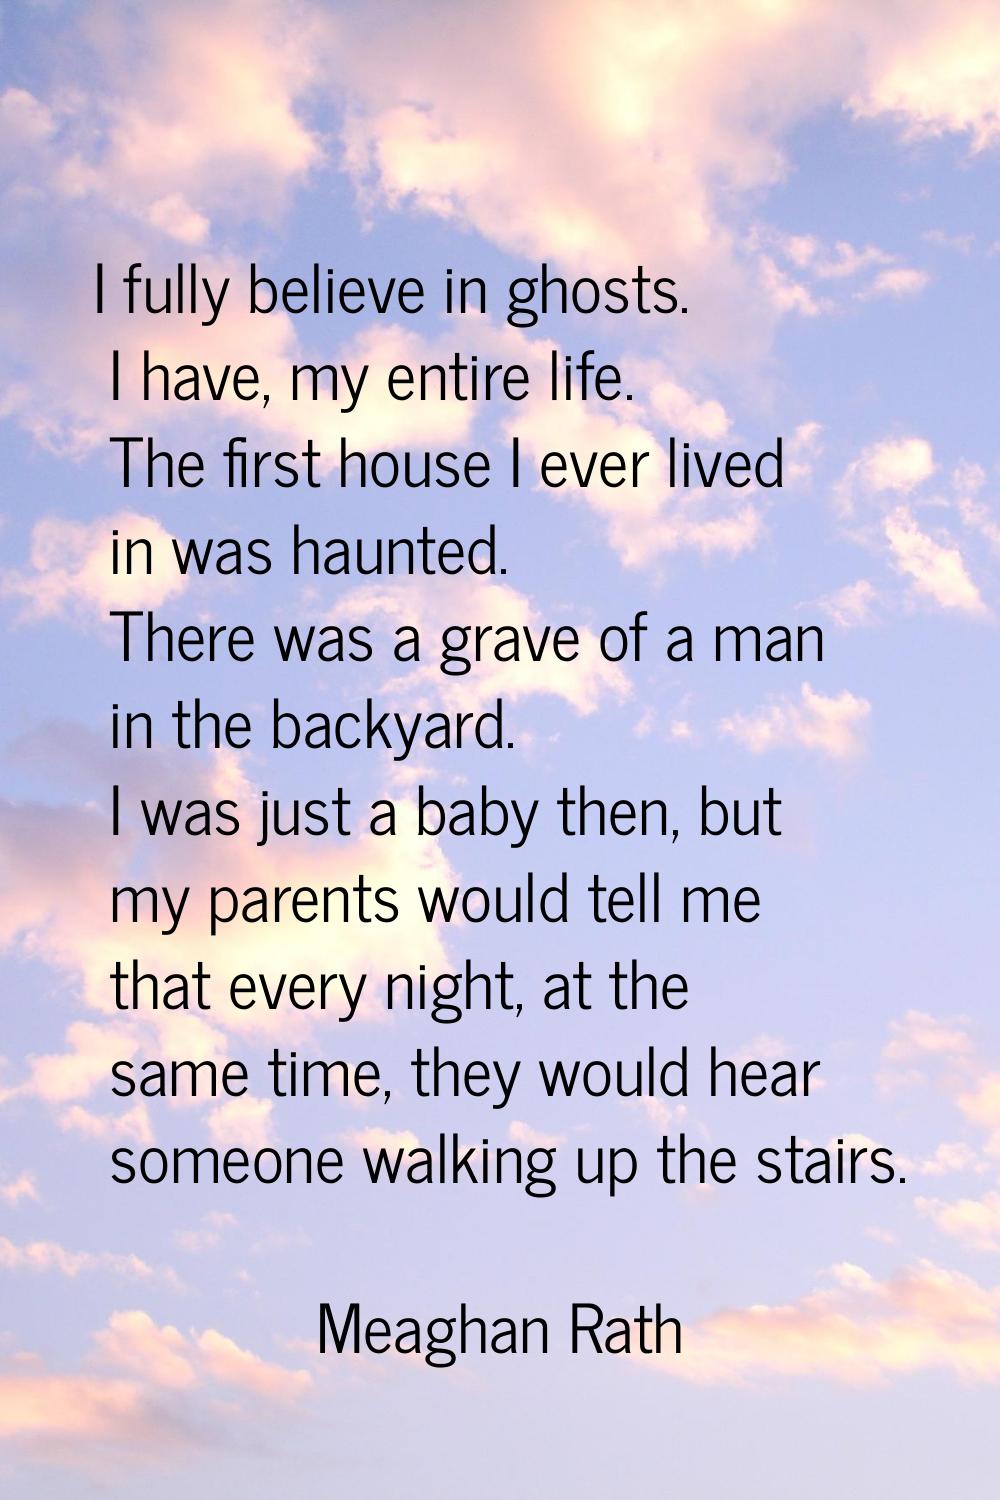 I fully believe in ghosts. I have, my entire life. The first house I ever lived in was haunted. The